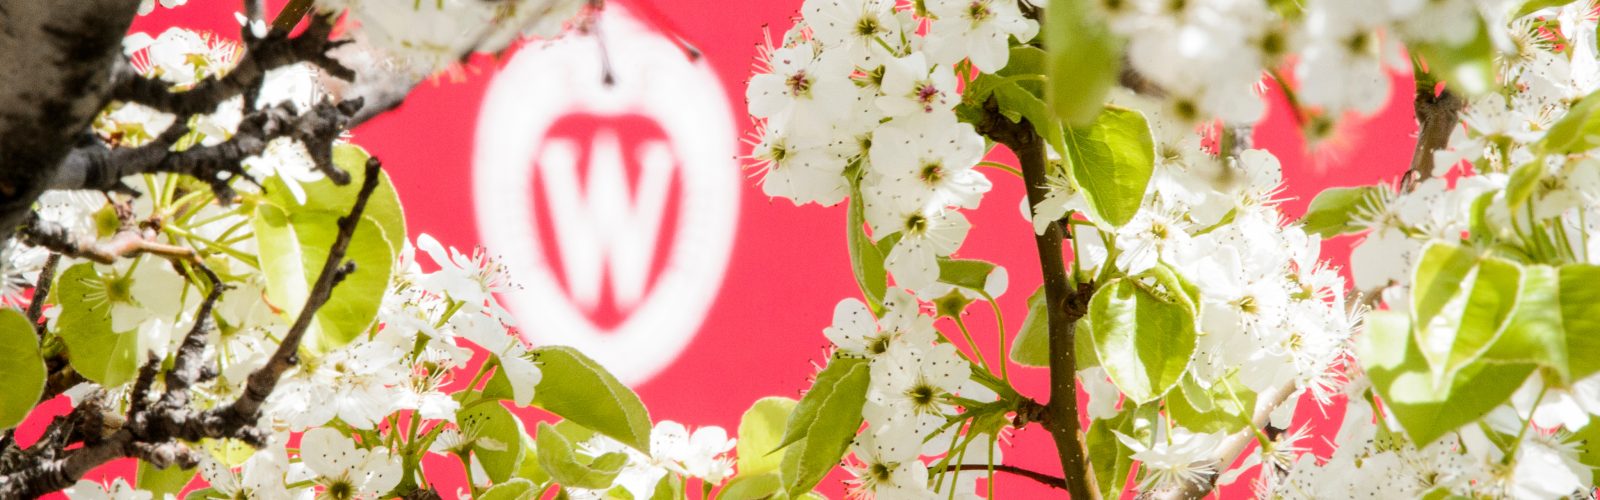 A W crest is pictured surrounded by the spring blooms of a pear tree.